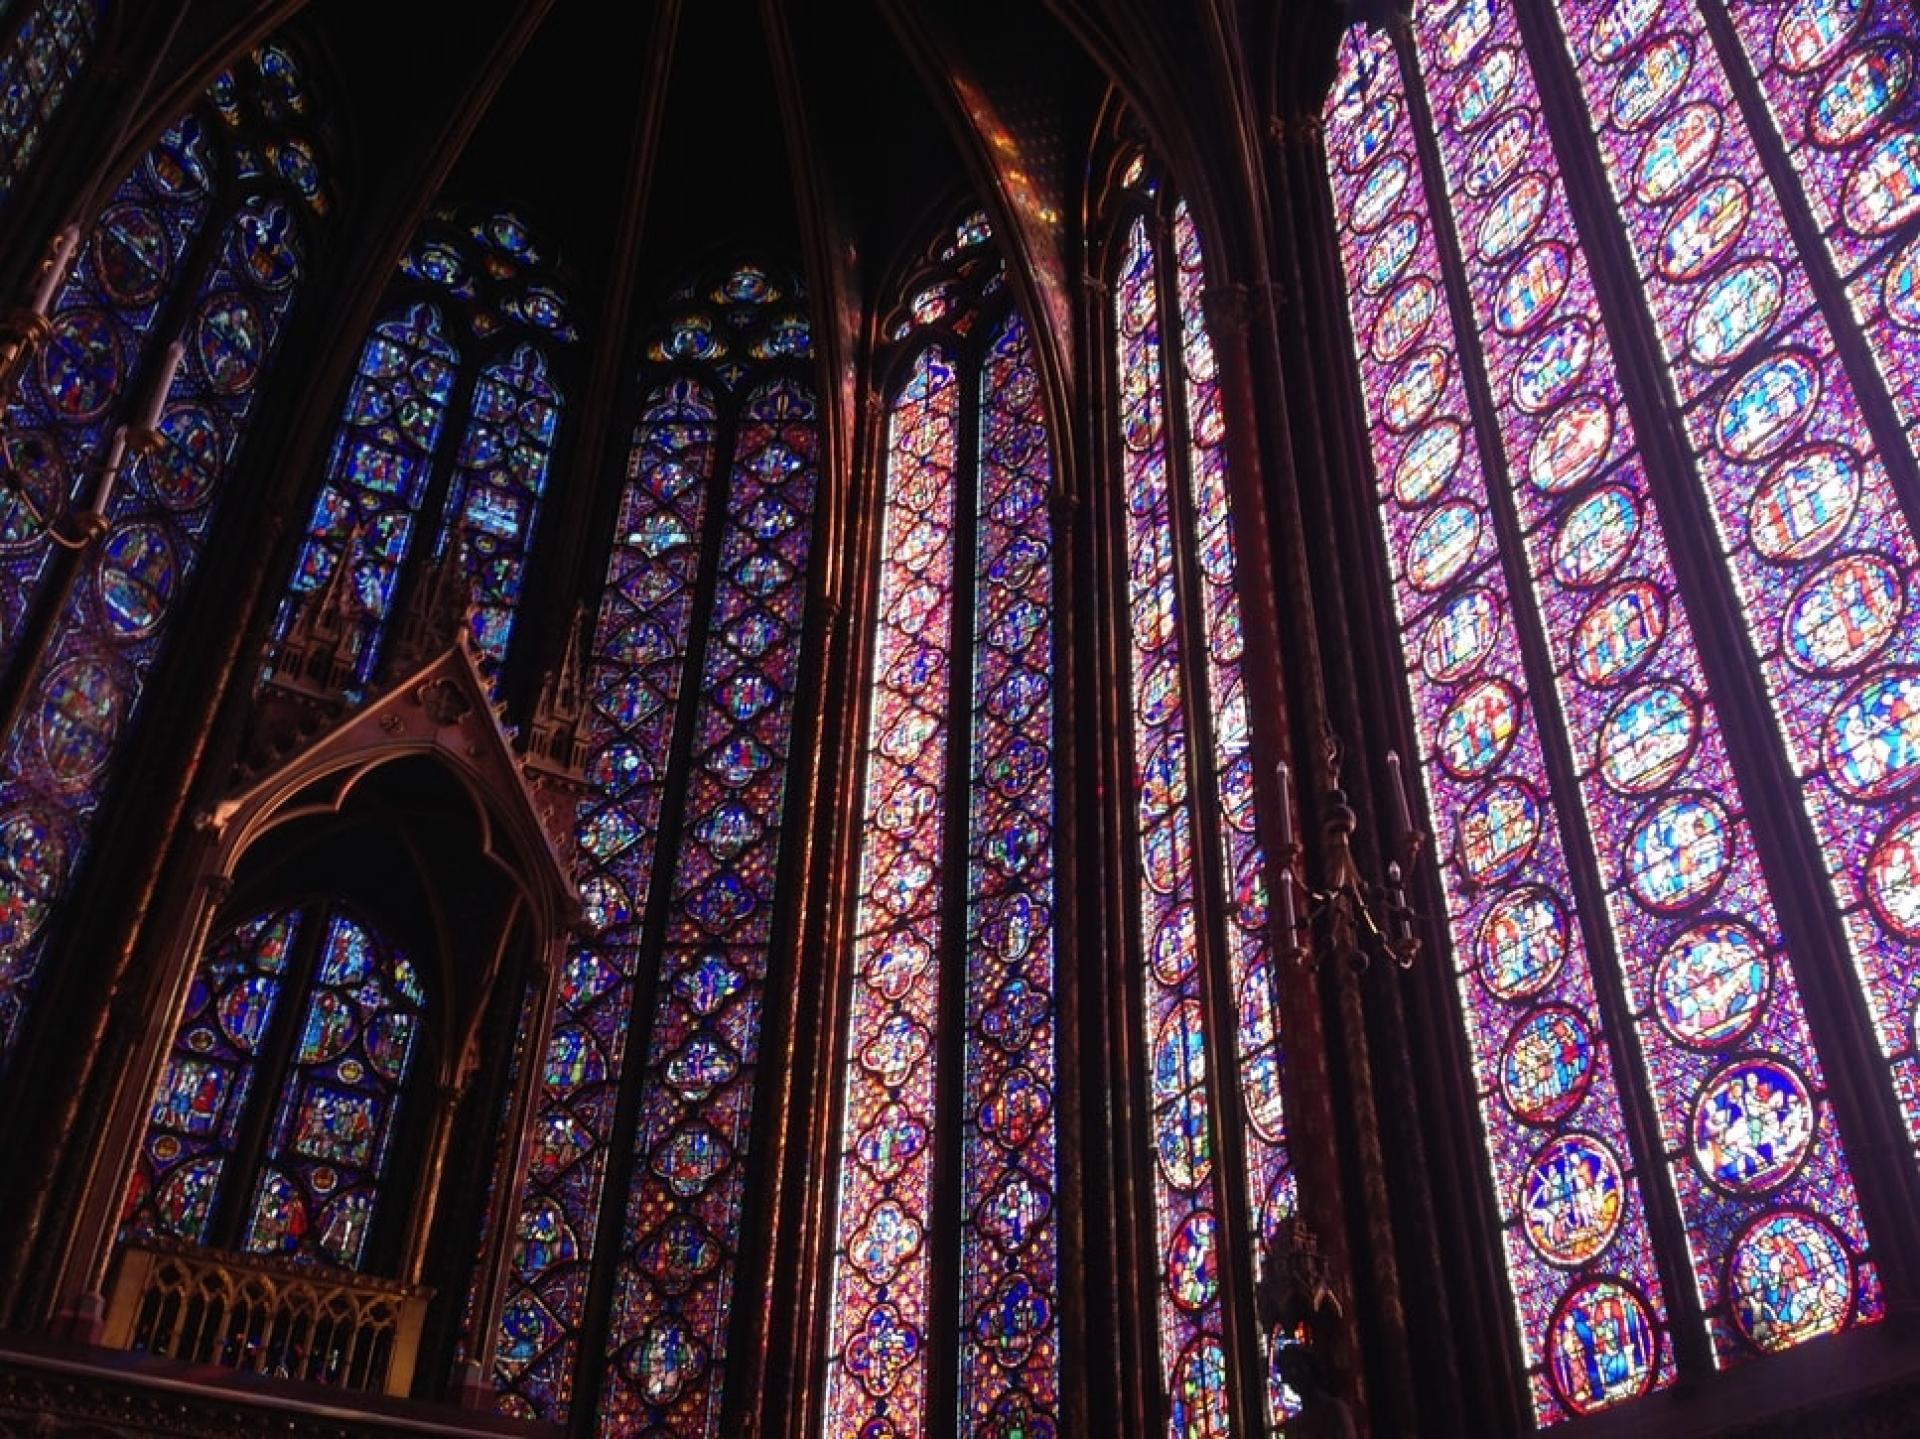 The Sainte Chapelle; a glass cathedral and a masterpiece of Gothic architecture